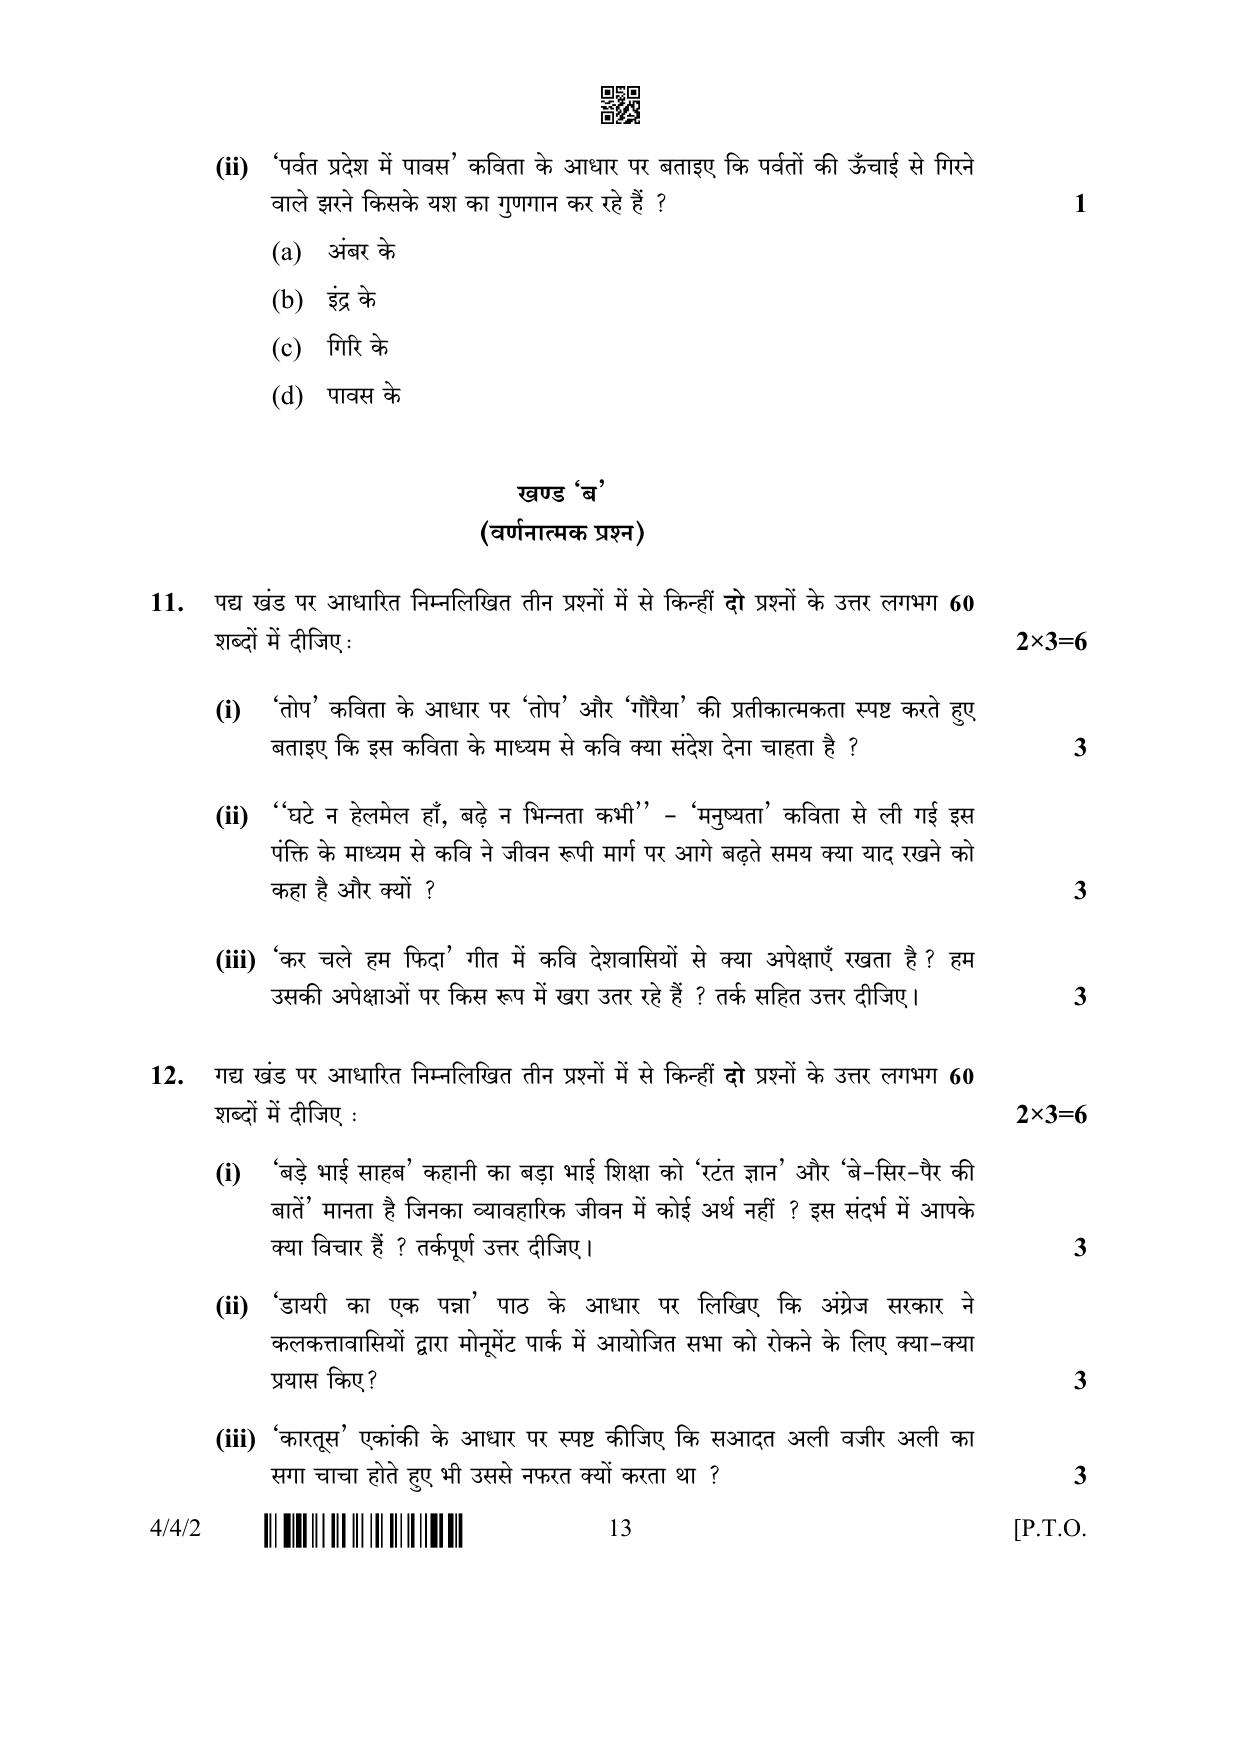 CBSE Class 10 4-4-2 Hindi B 2023 Question Paper - Page 13